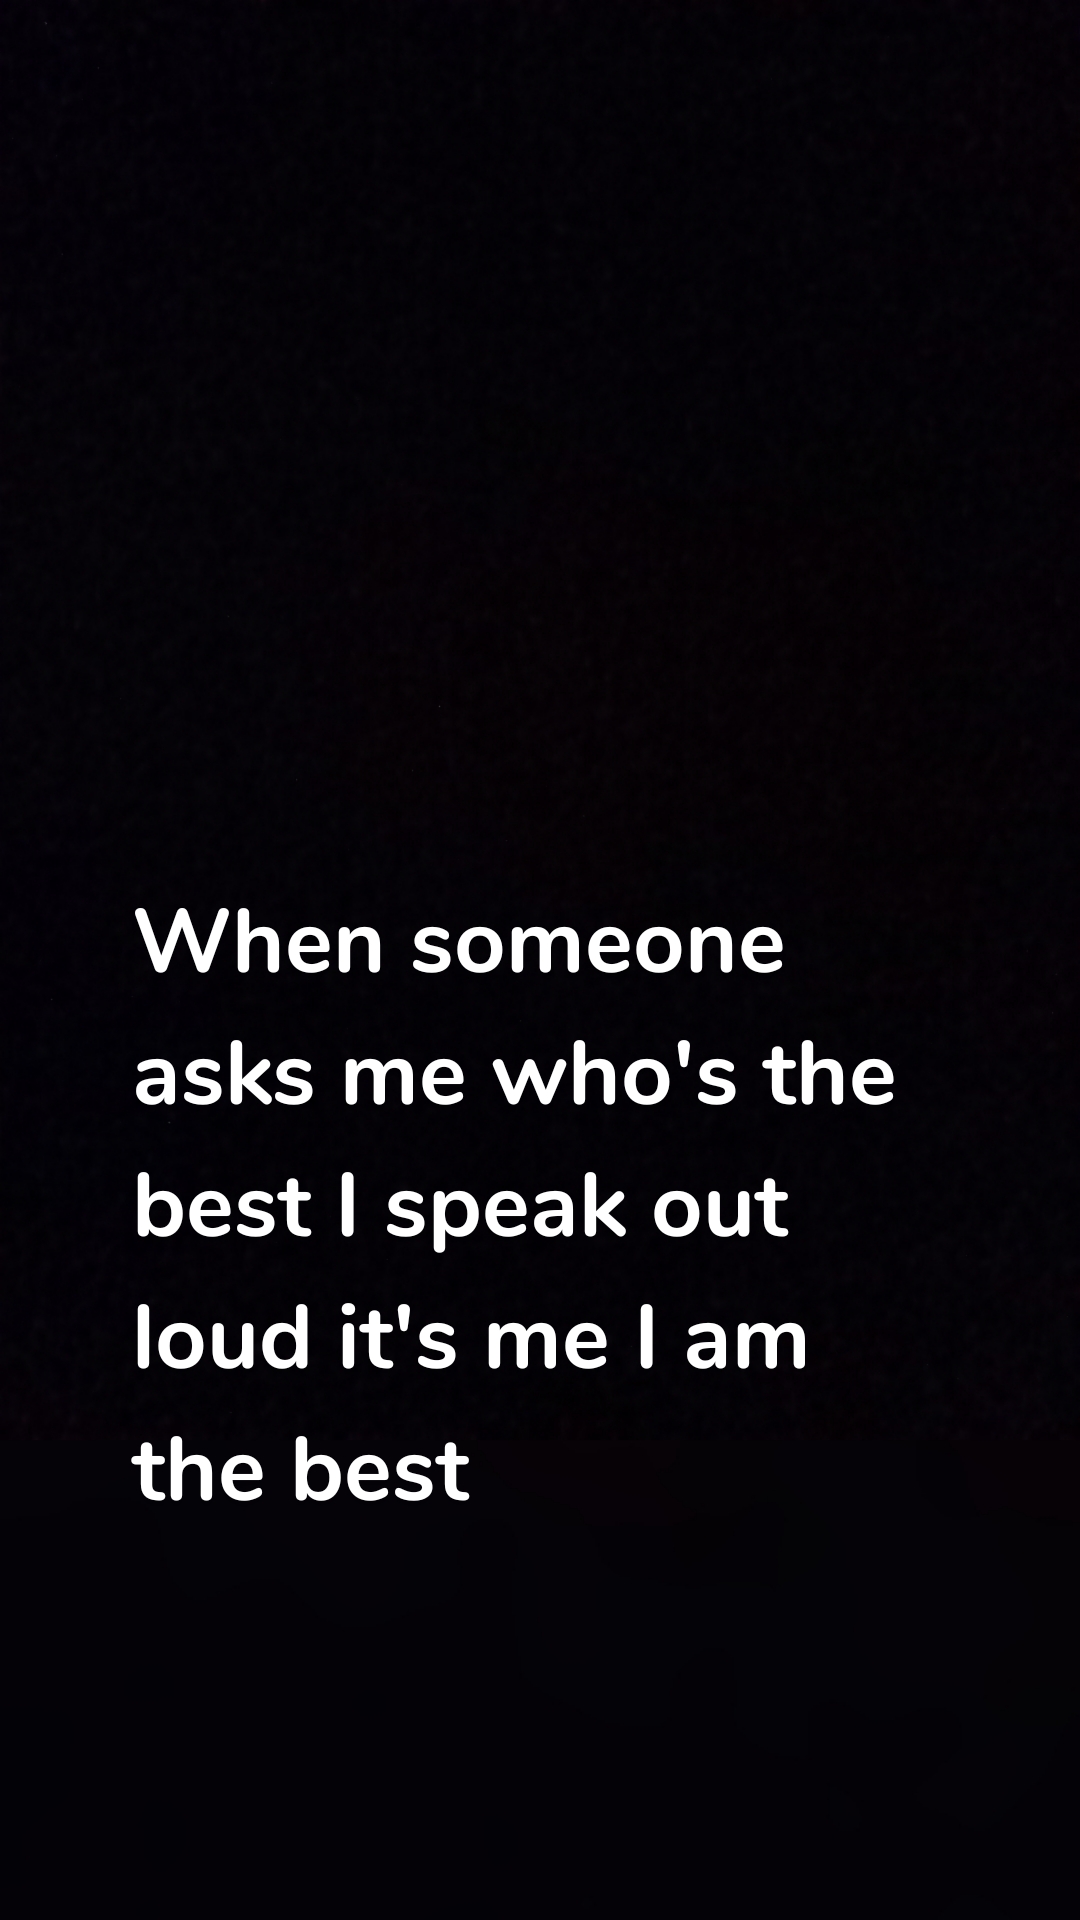 When someone asks me who's the best I speak out loud it's me I am the best 